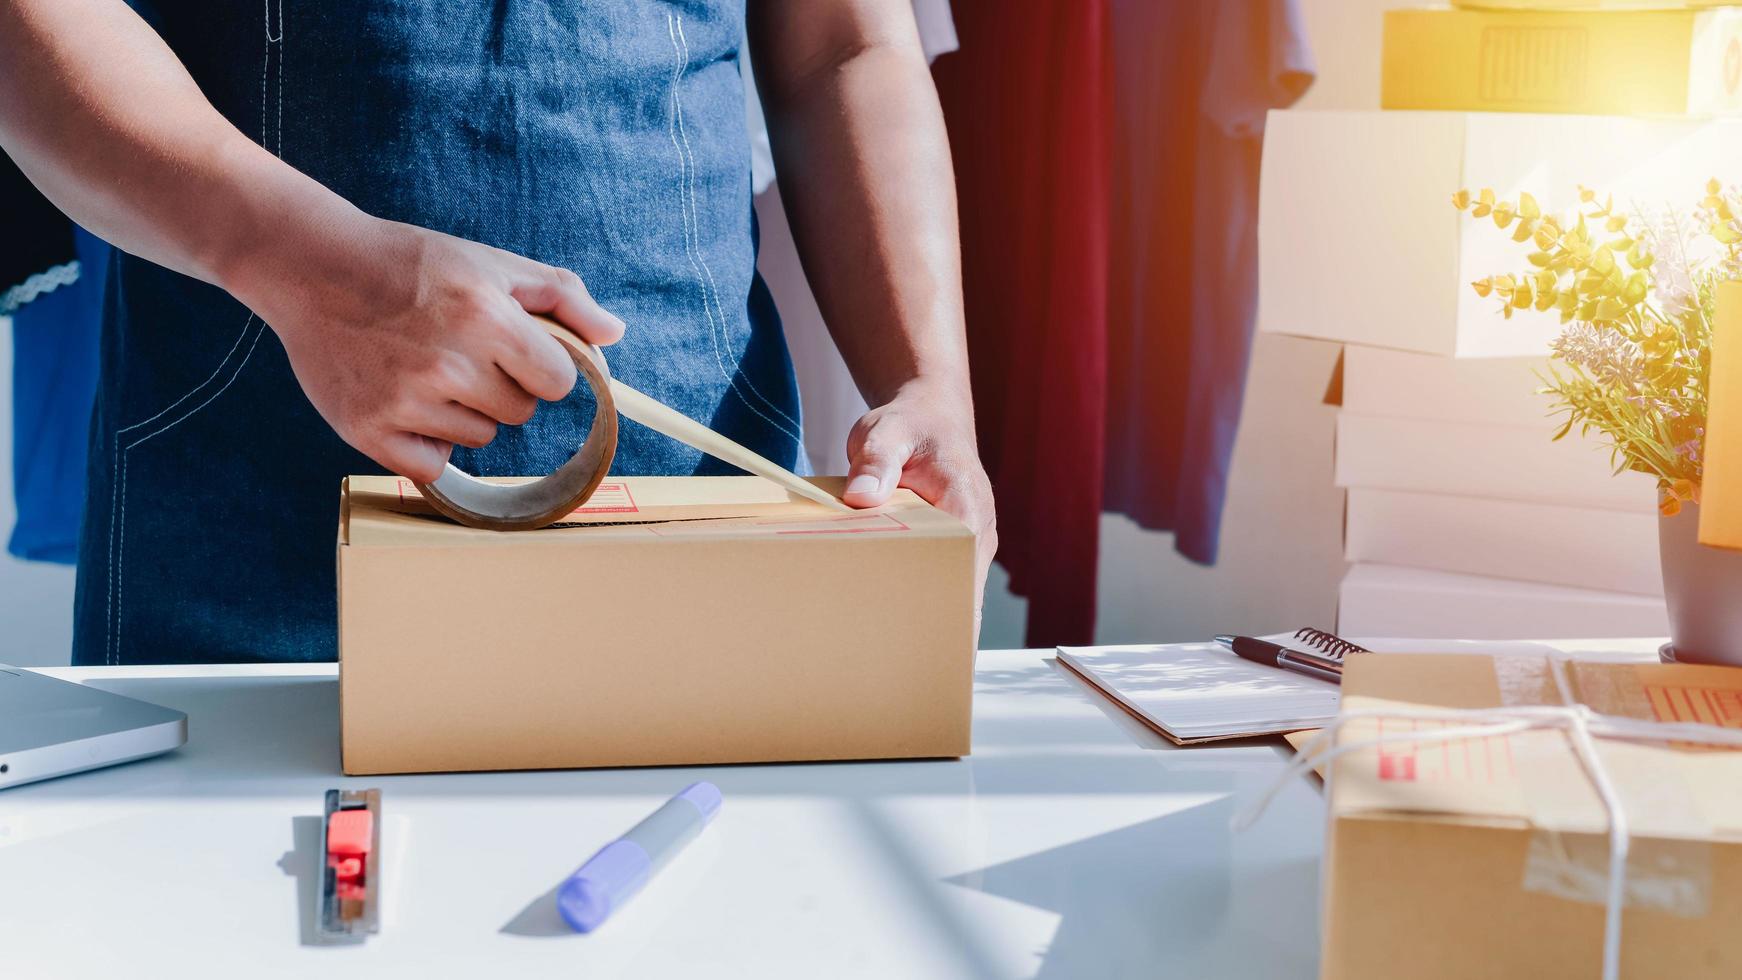 Close-up view of man's online store, small business owner seller, entrepreneur packing package post shipping box preparing delivery parcel on the table, entrepreneurial self-employed business concept photo